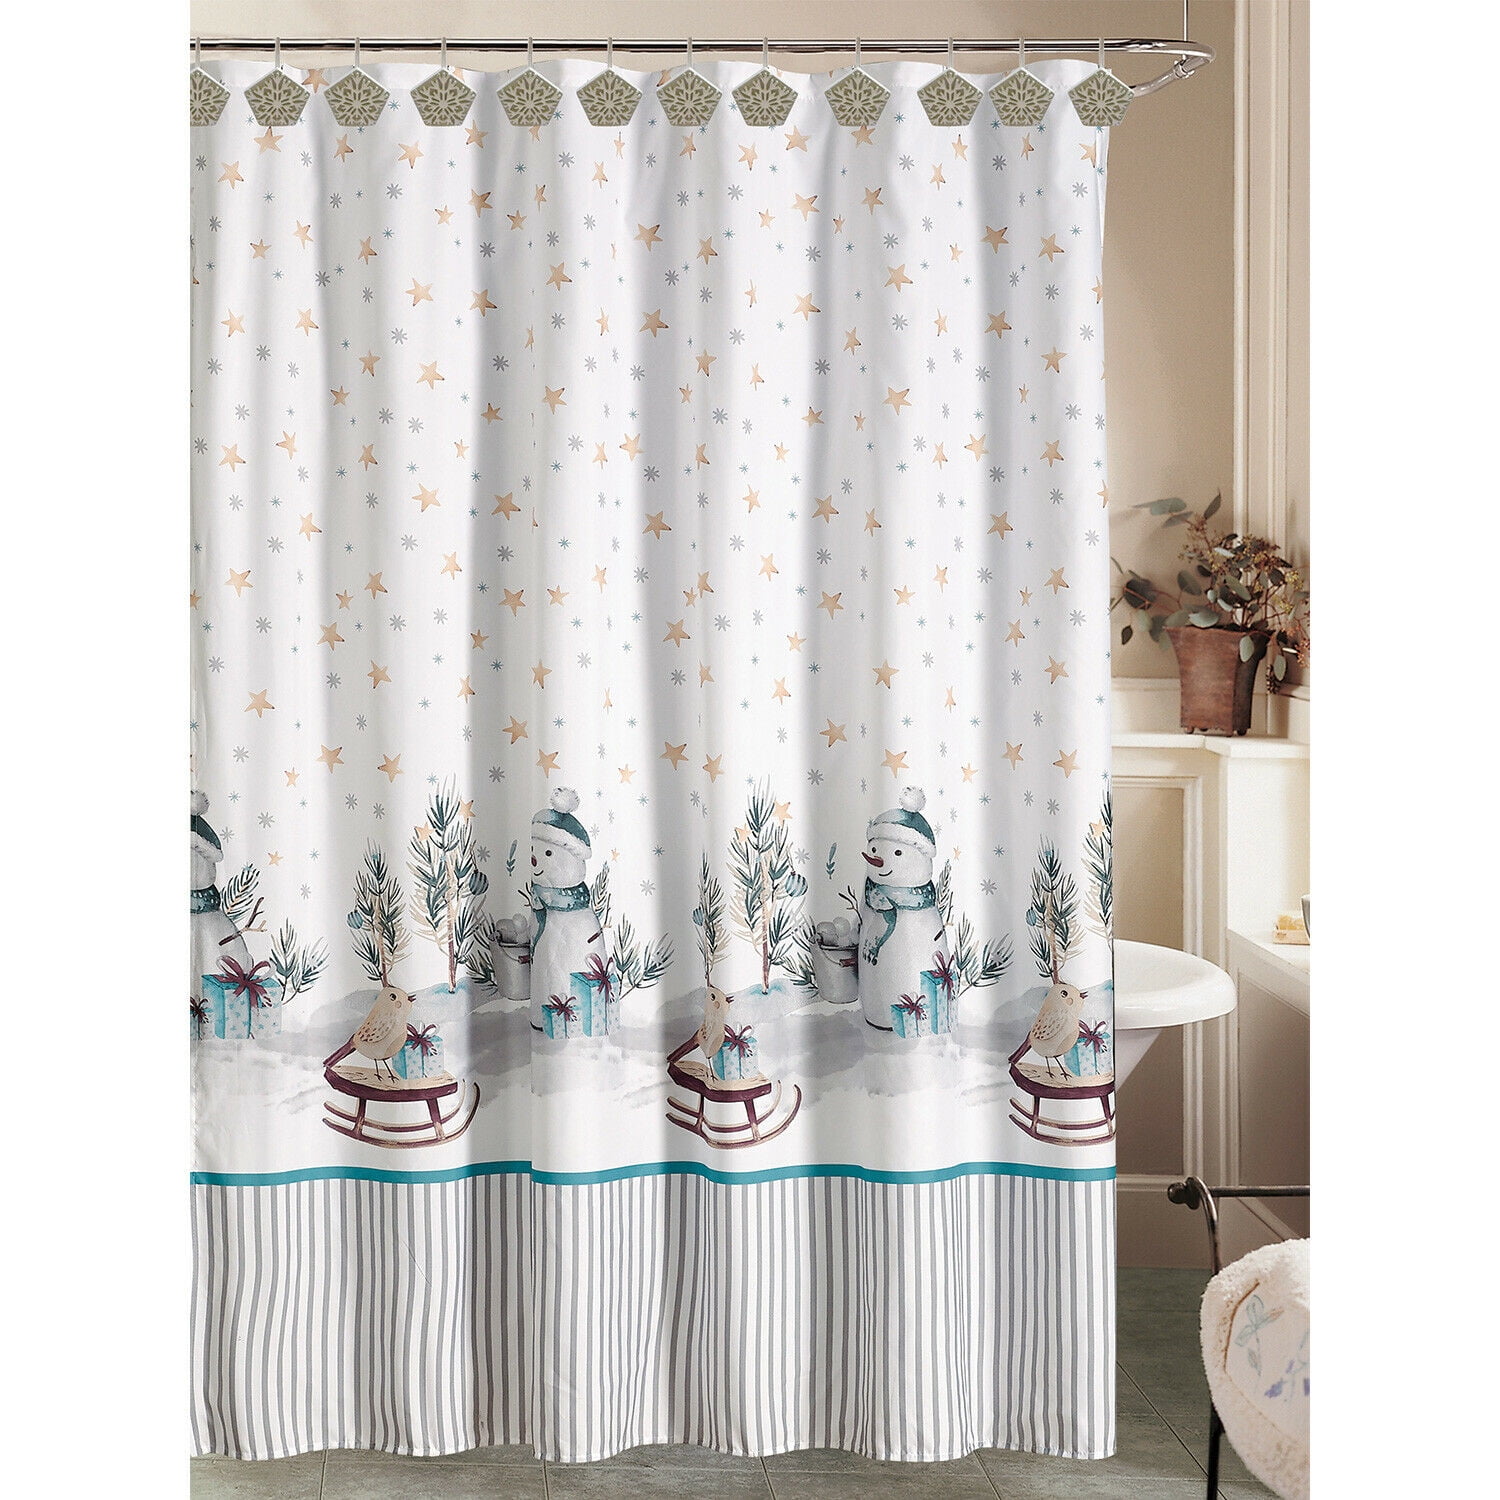 Striped Snowman Border Winter Holidays, Blue And Gray Shower Curtain Sets